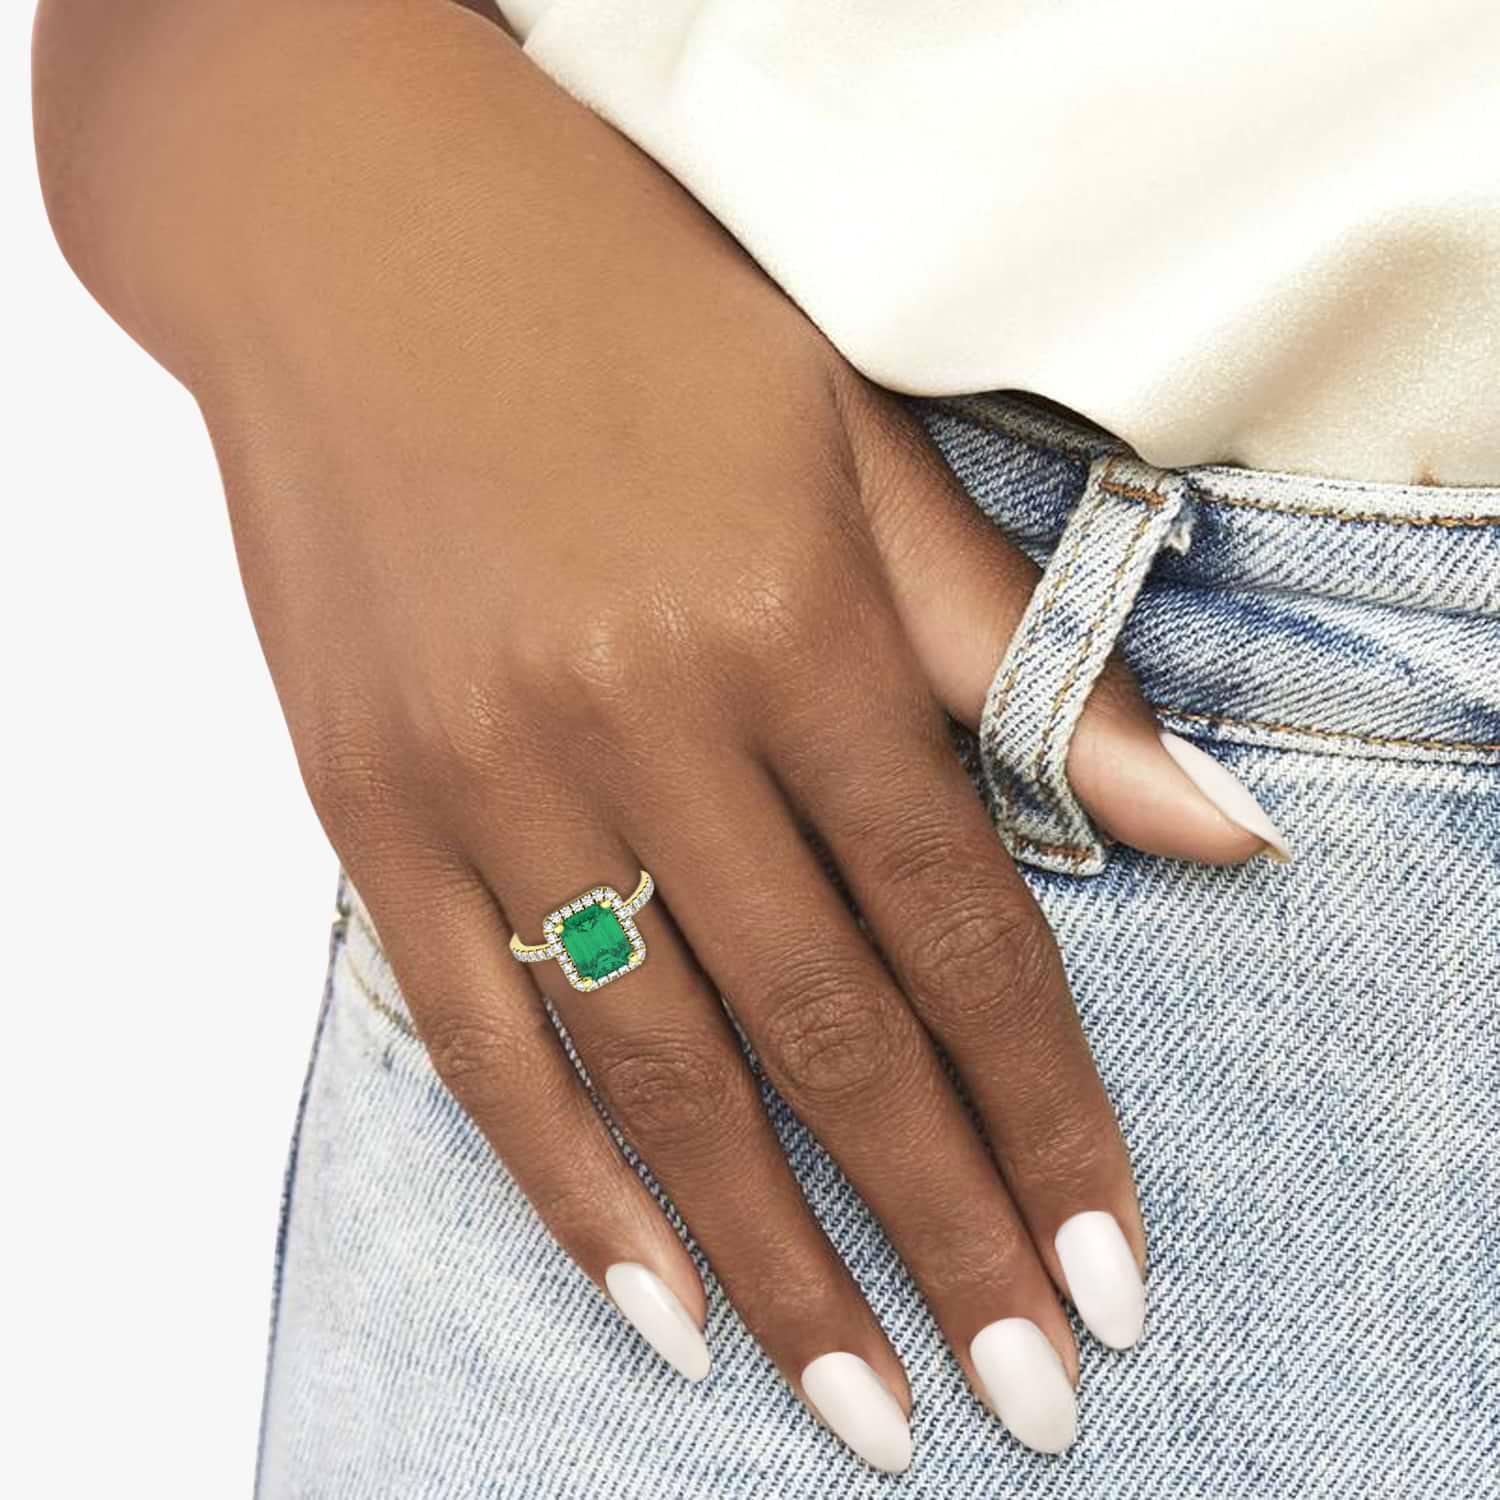 Amazon.com: Edwardian style solitaire emerald Engagement ring 18k white gold  natural emerald, filigree engagement ring, promise ring, antique 14k ring :  Handmade Products